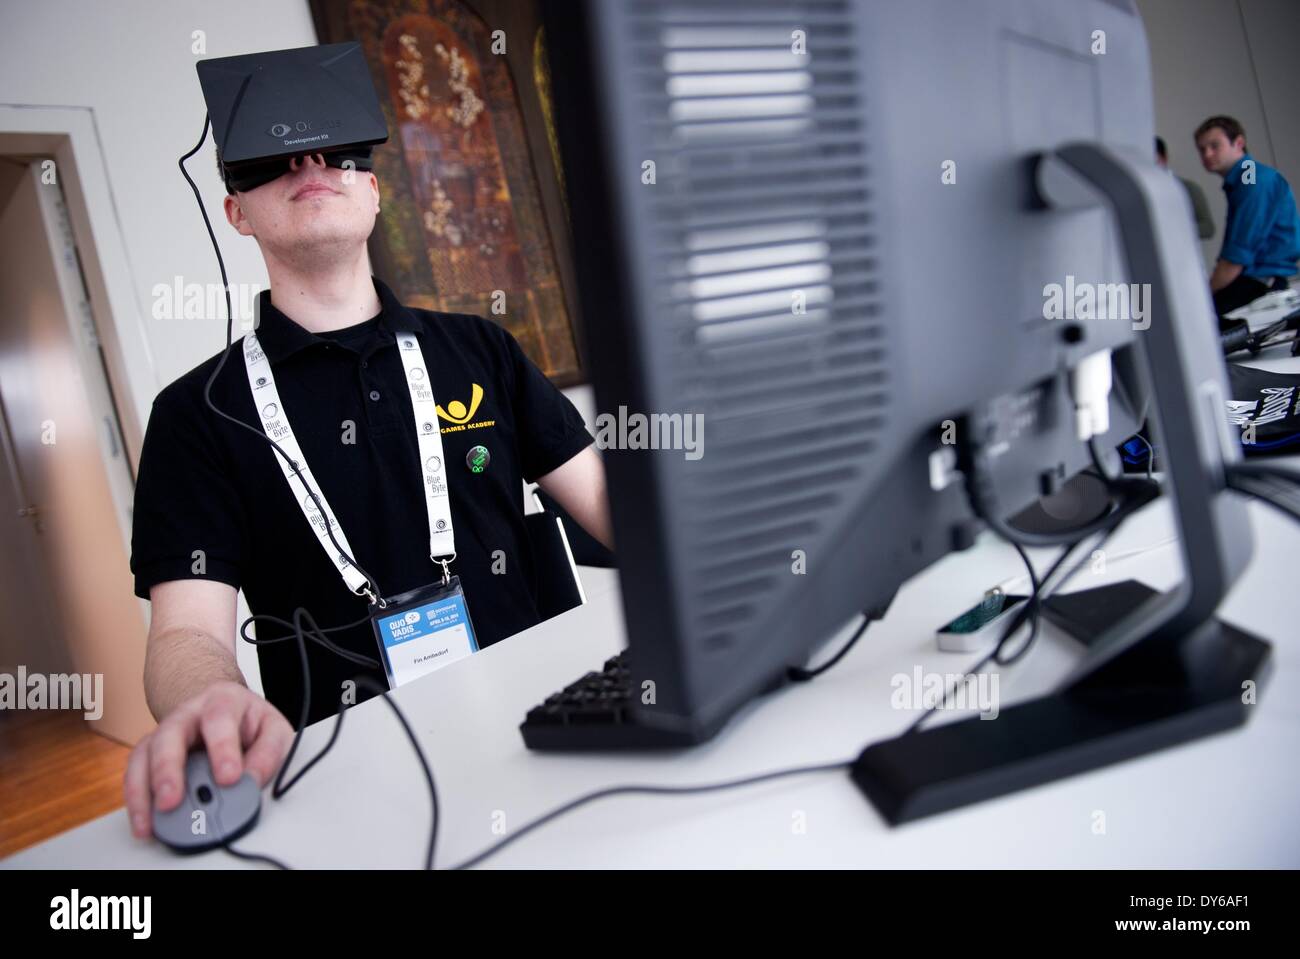 Berlin, Germany. 08th Apr, 2014. A man plays a game with the virtual reality head-mounted display 'Oculus Rift' at International Games Week in Berlin, Germany, 08 April 2014. The display transfers the eye movements to the game in real time. International Games Week Berlin takes place from 08 till 13 April 2014. Photo: DANIEL NAUPOLD/DPA/Alamy Live News Stock Photo